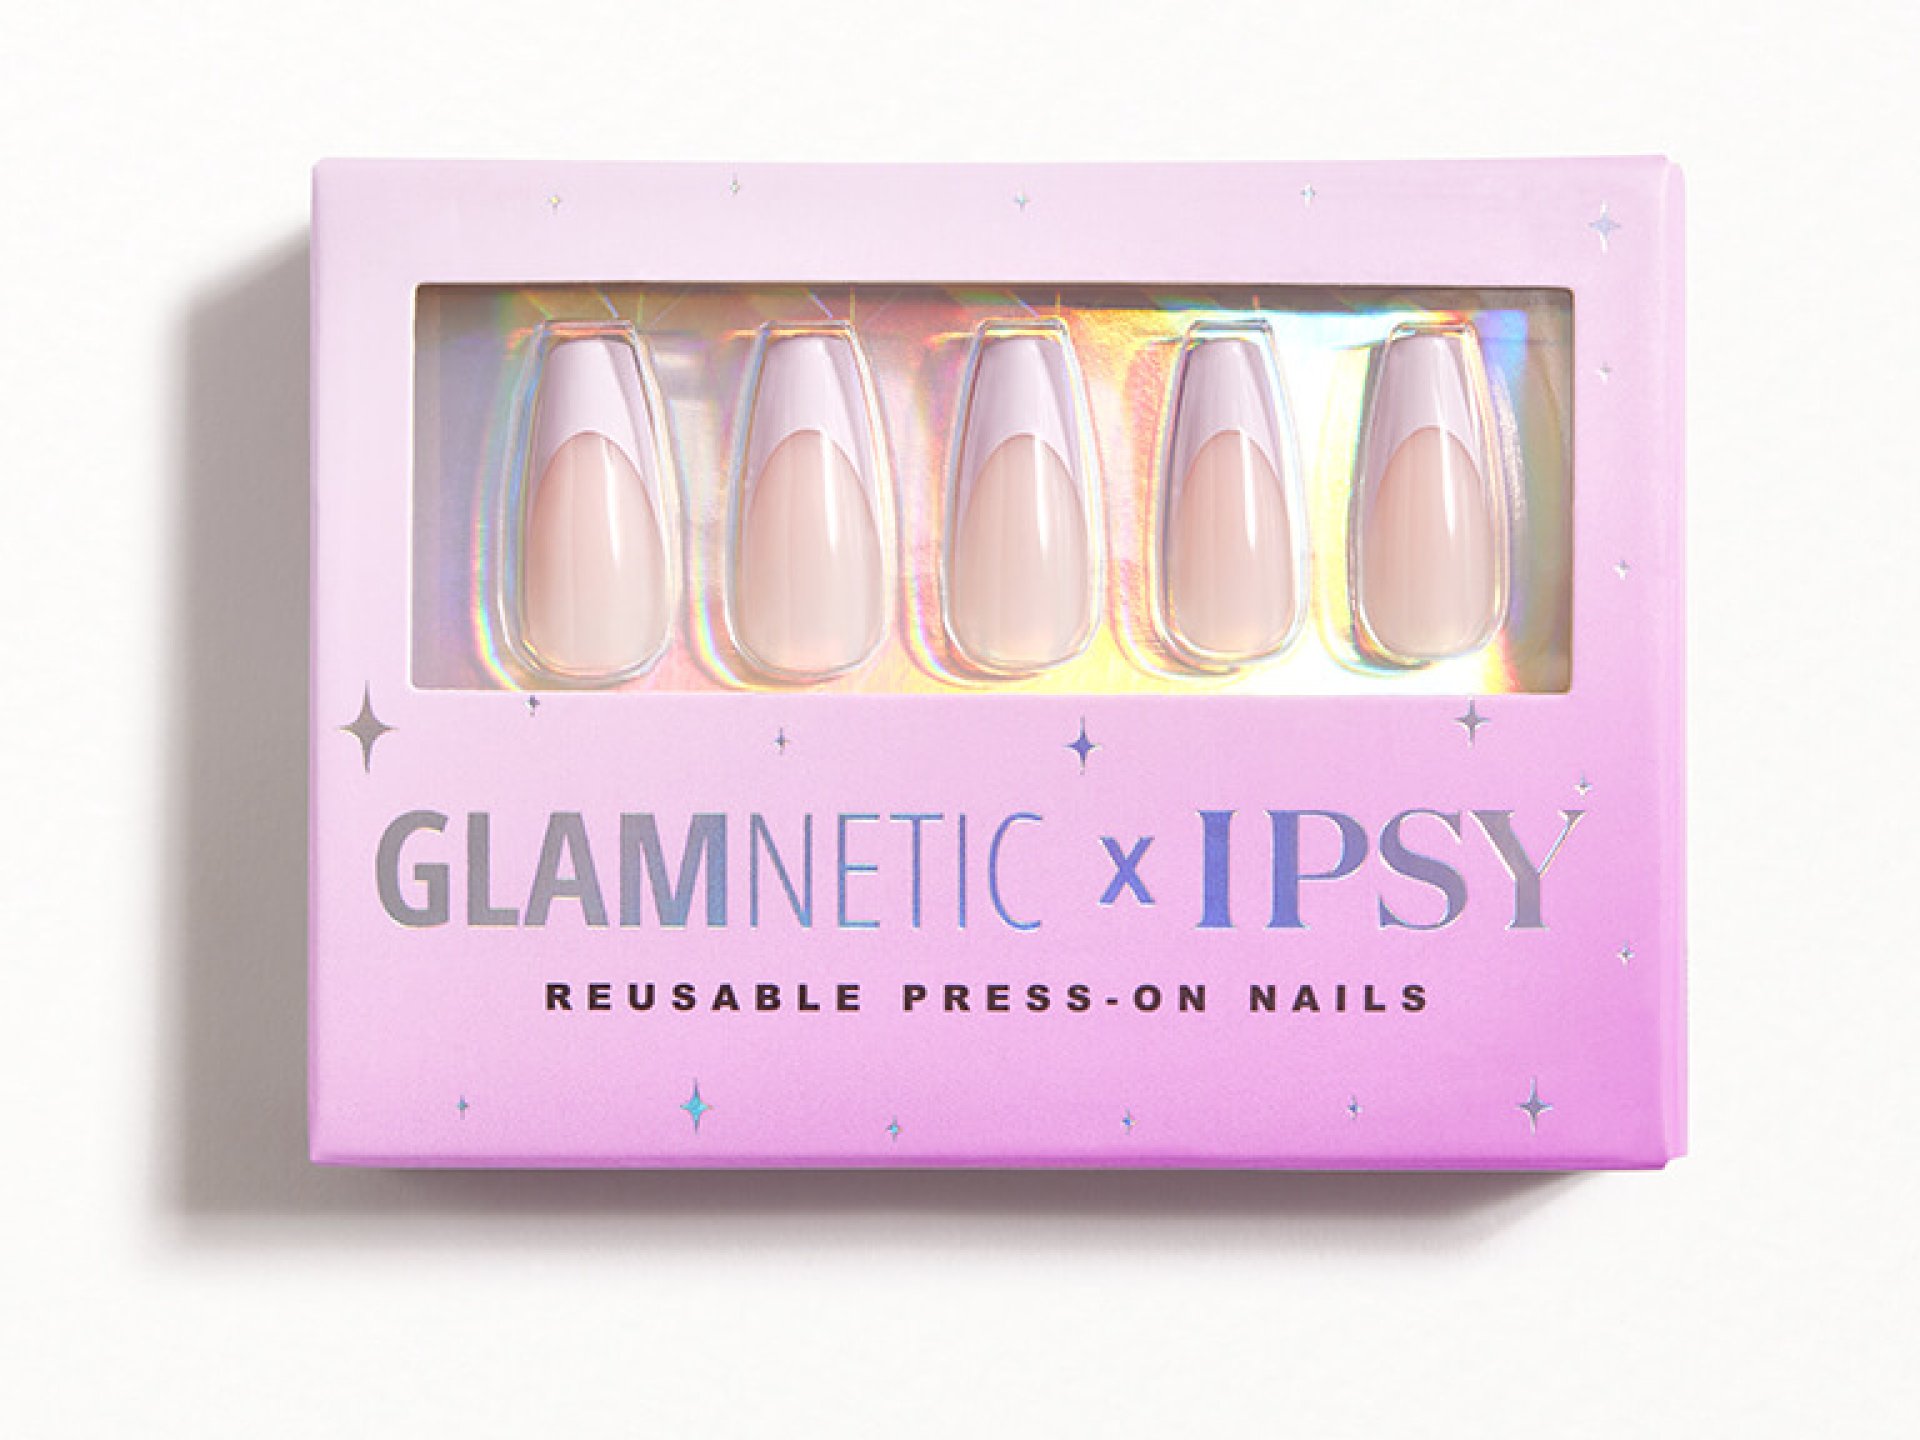 GLAMNETIC Glamnetic x IPSY Reusable Press-On Nails in LILAC SKY